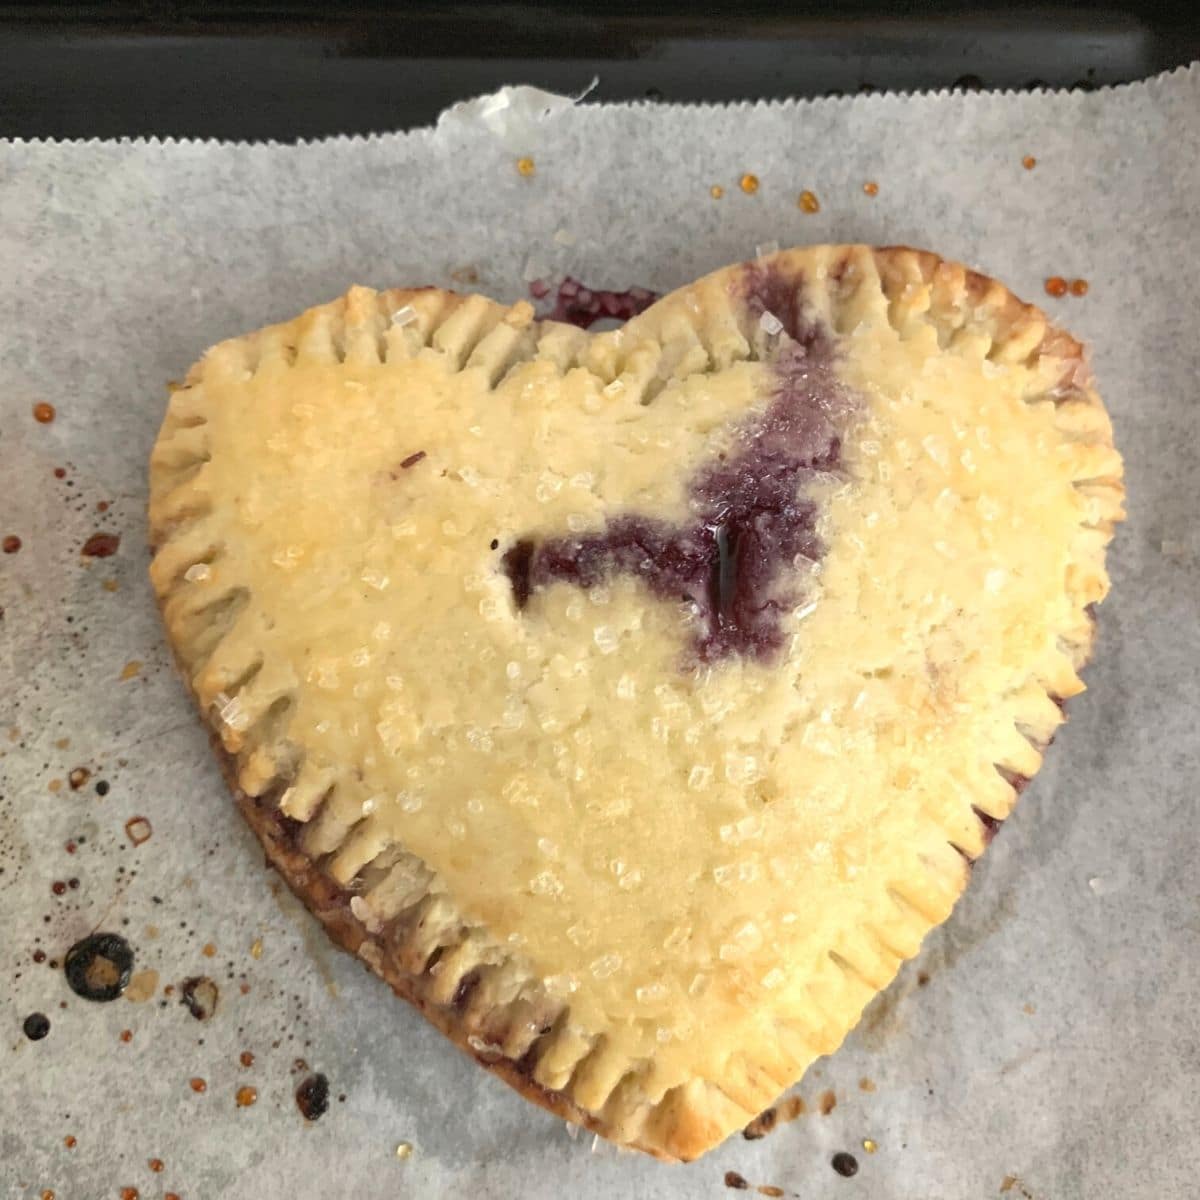 An oven baked heart shaped hand pie.